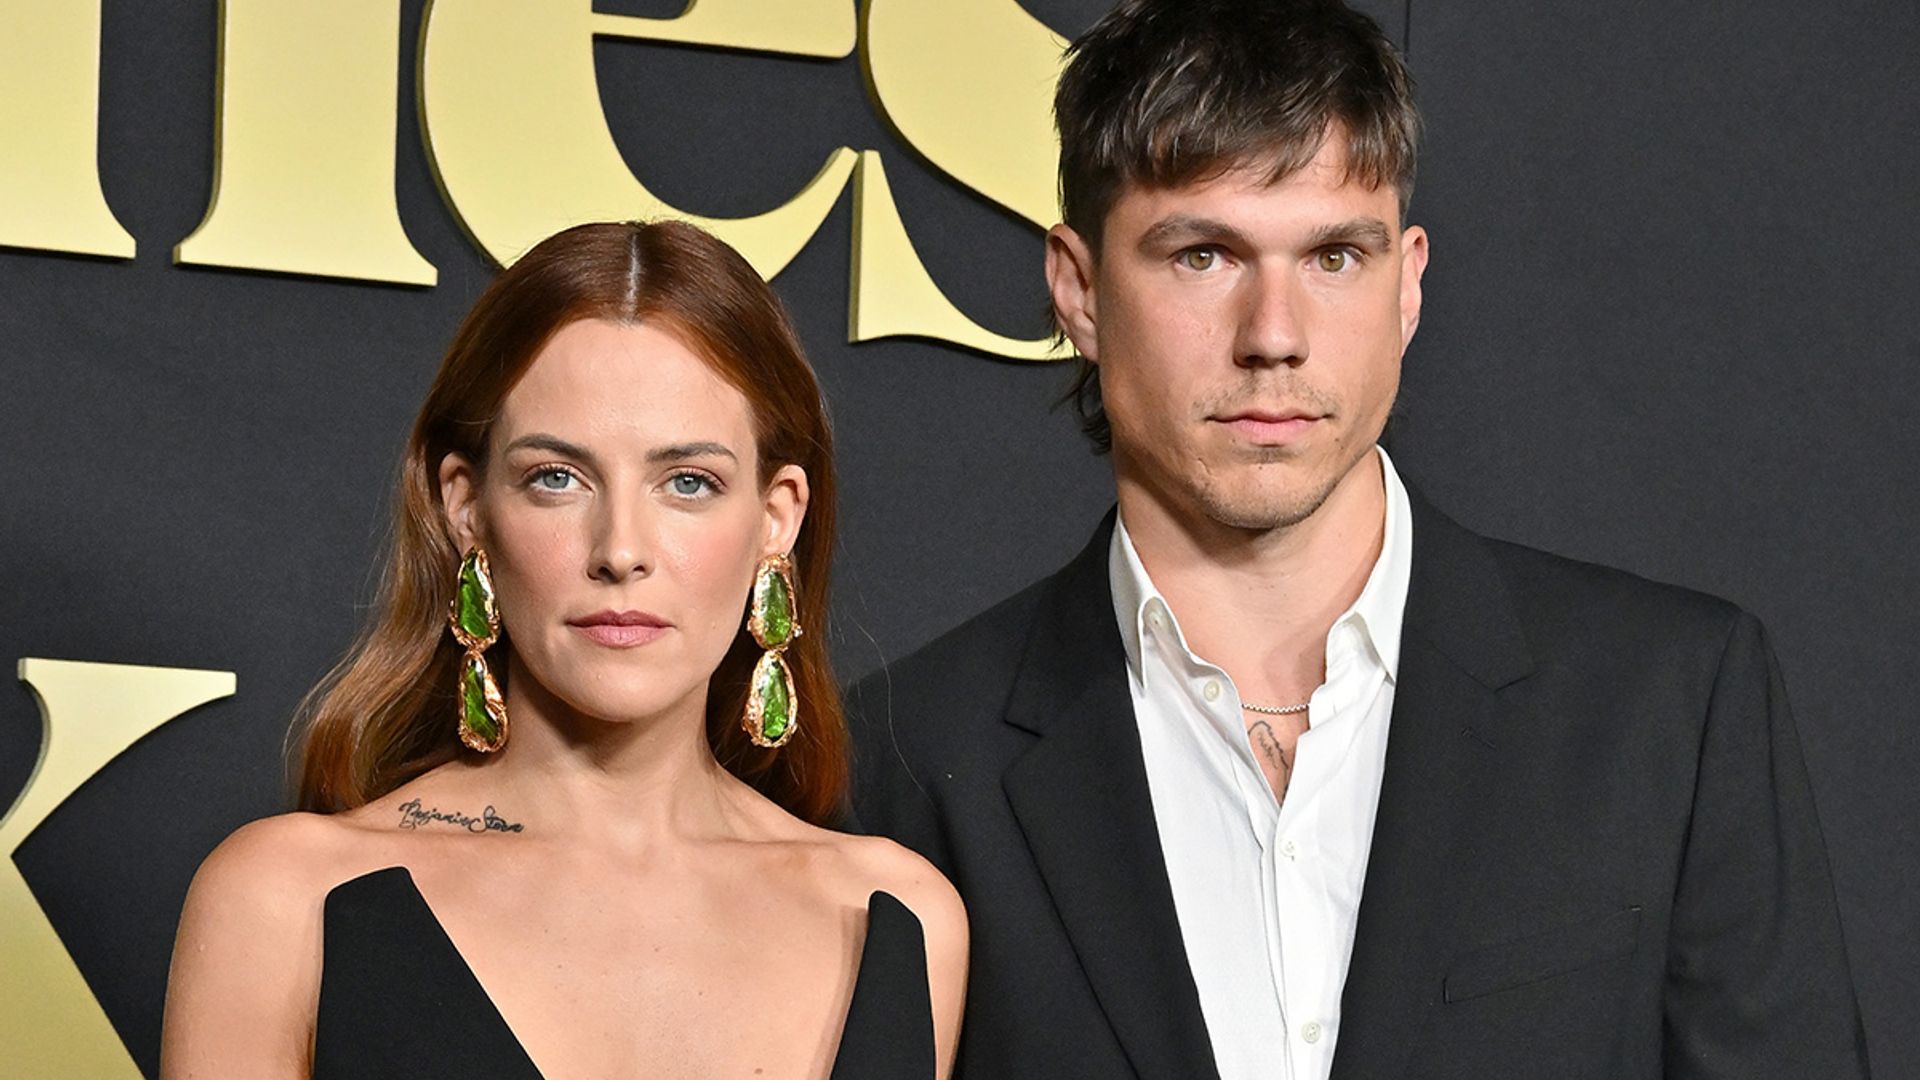 Riley Keough shares intimate details of marriage as she gives rare glimpse into relationship HELLO!